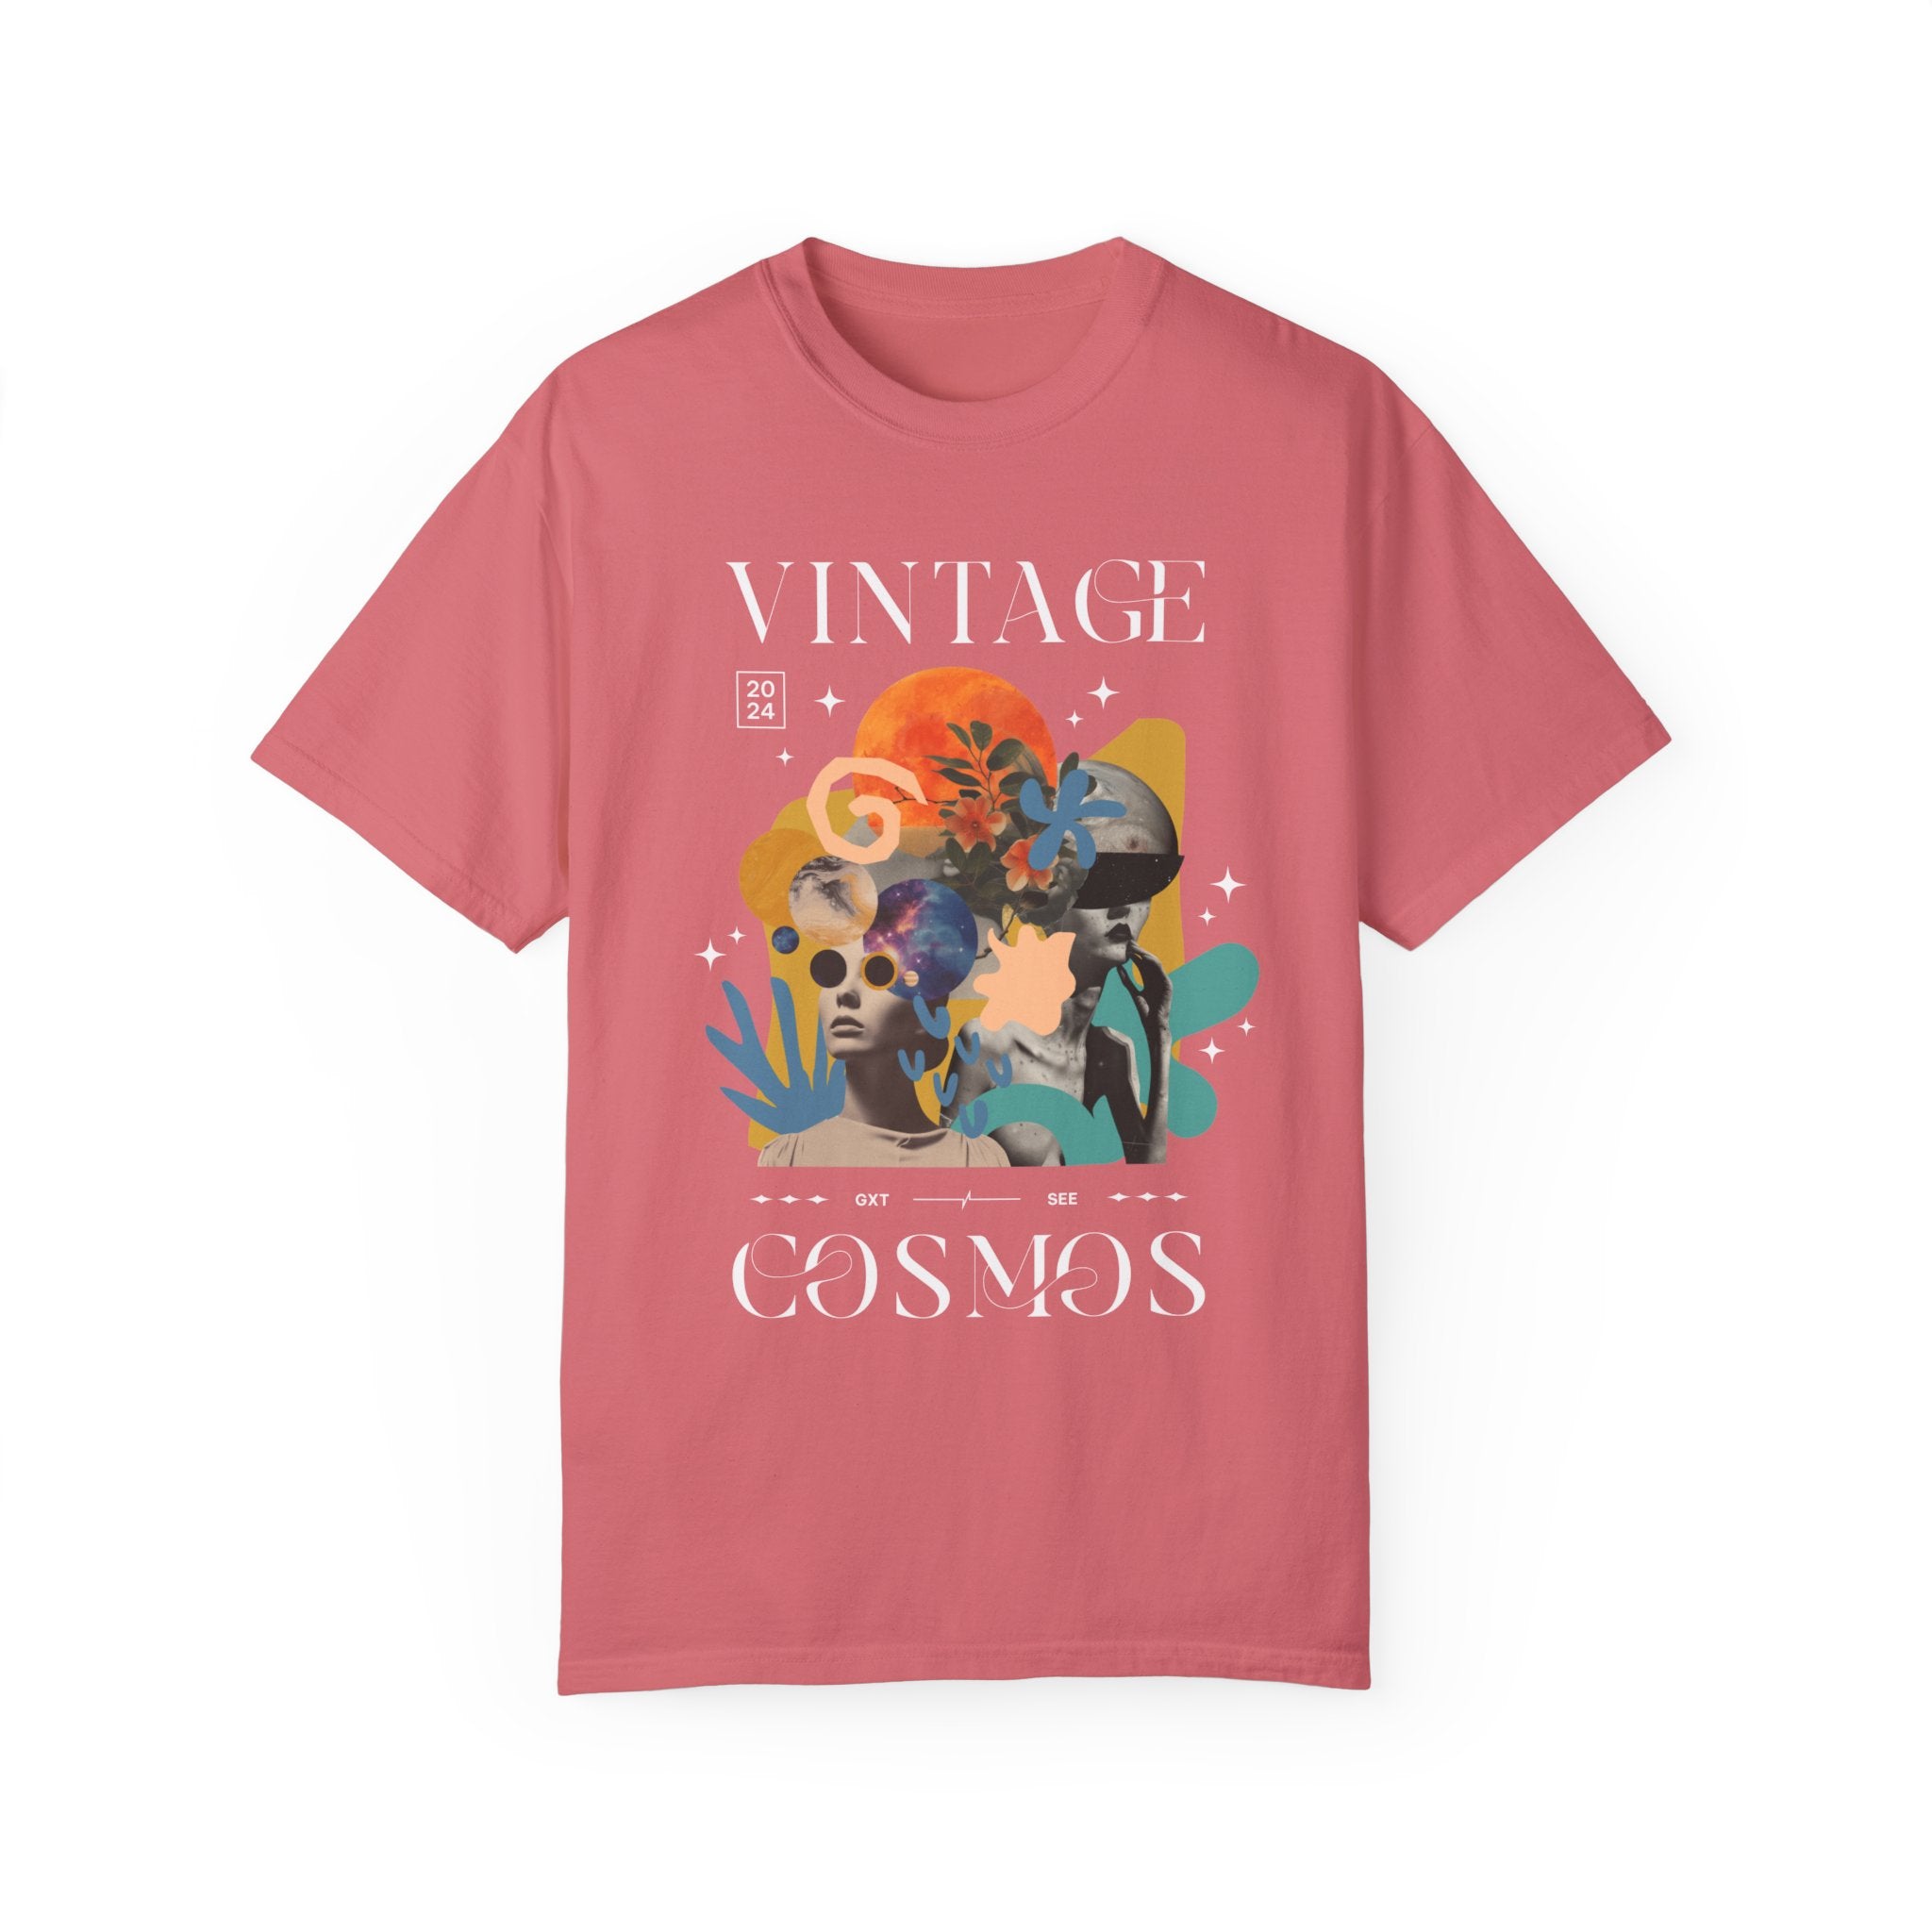 GOLDxTEAL Vintage Cosmos graphic t-shirt.